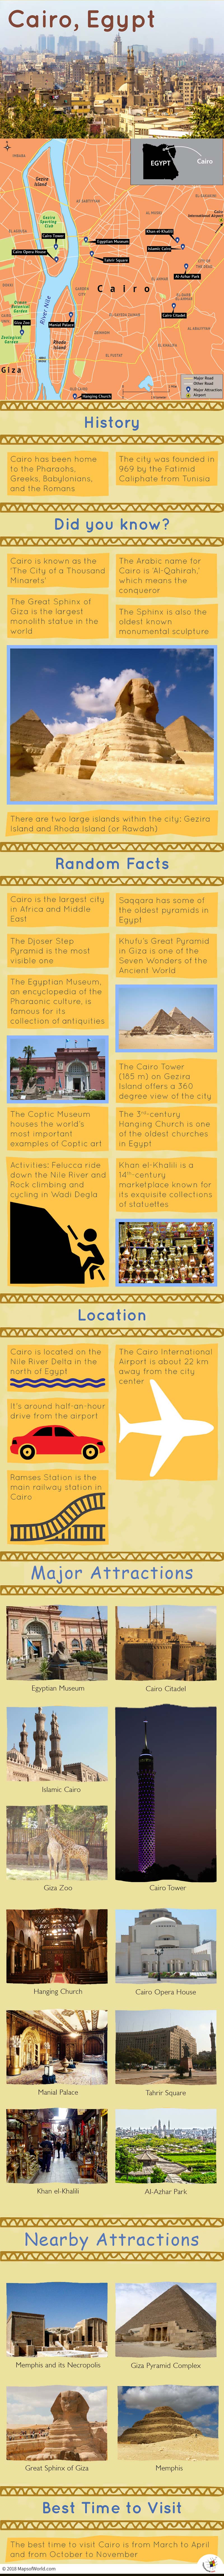 Infographic Depicting Cairo Tourist Attractions